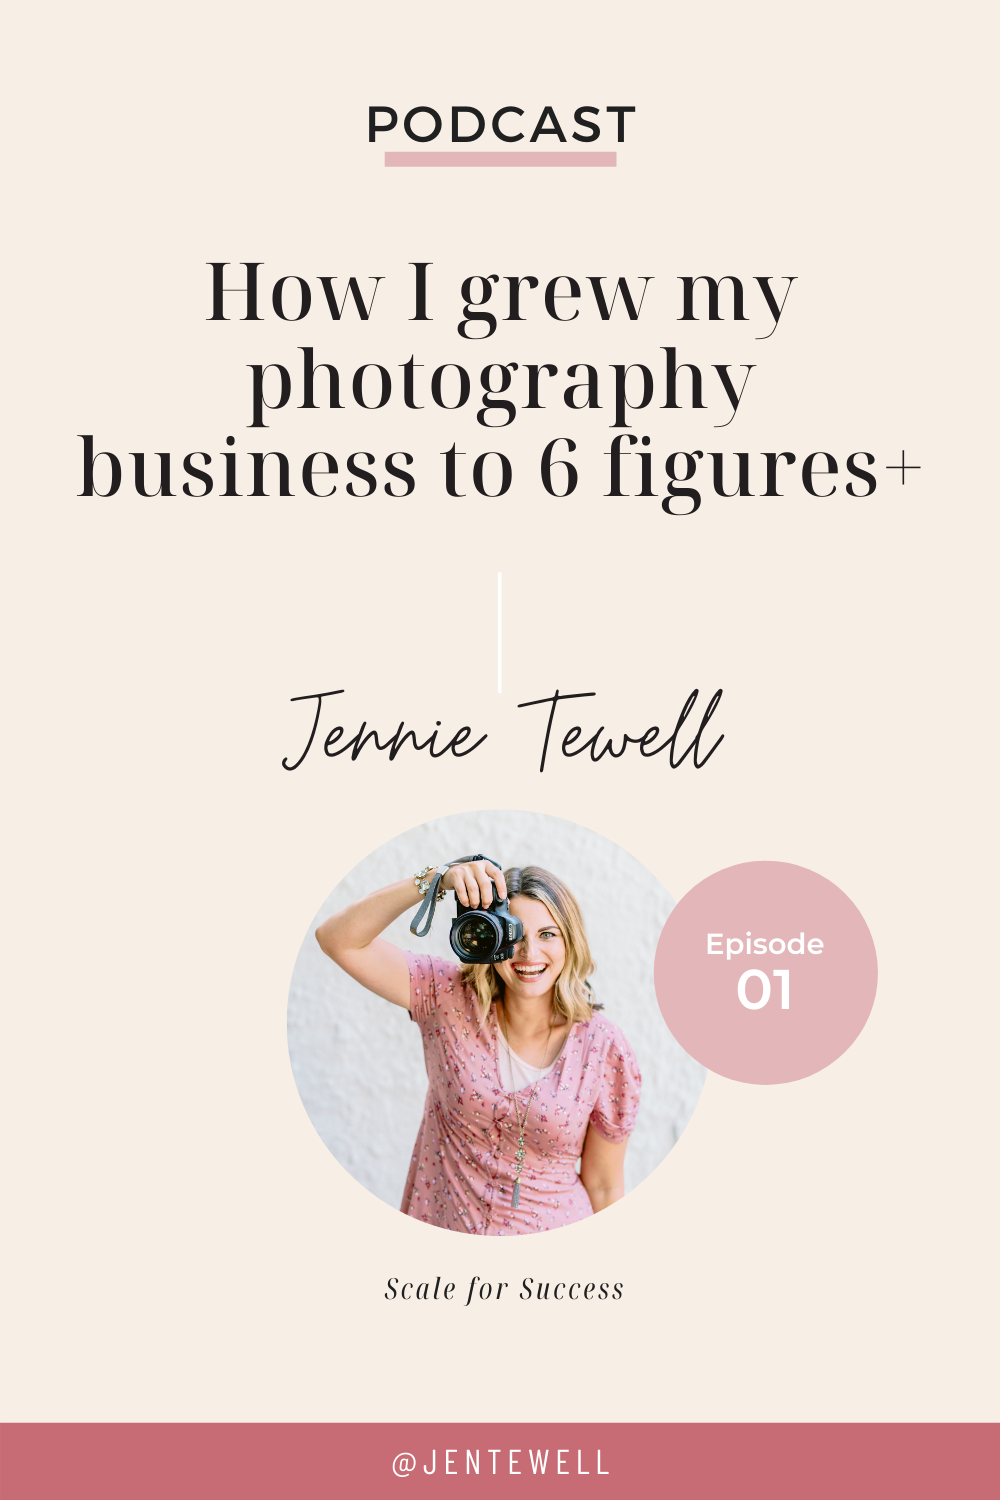 How I grew my photography business to 6 figures